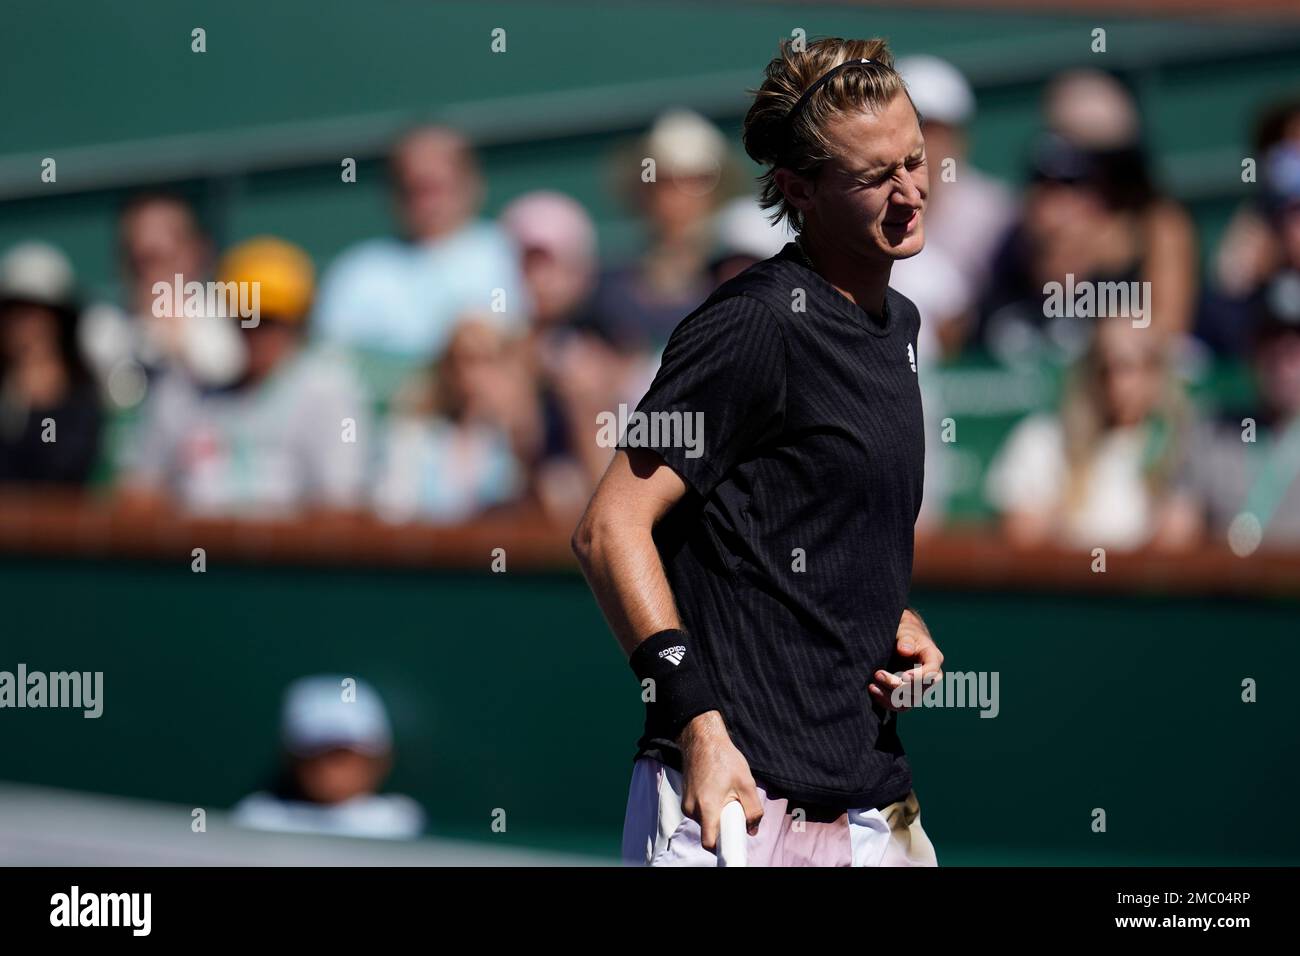 Sebastian Korda reacts after a shot to Rafael Nadal, of Spain, at the BNP Paribas Open tennis tournament Saturday, March 12, 2022, in Indian Wells, Calif